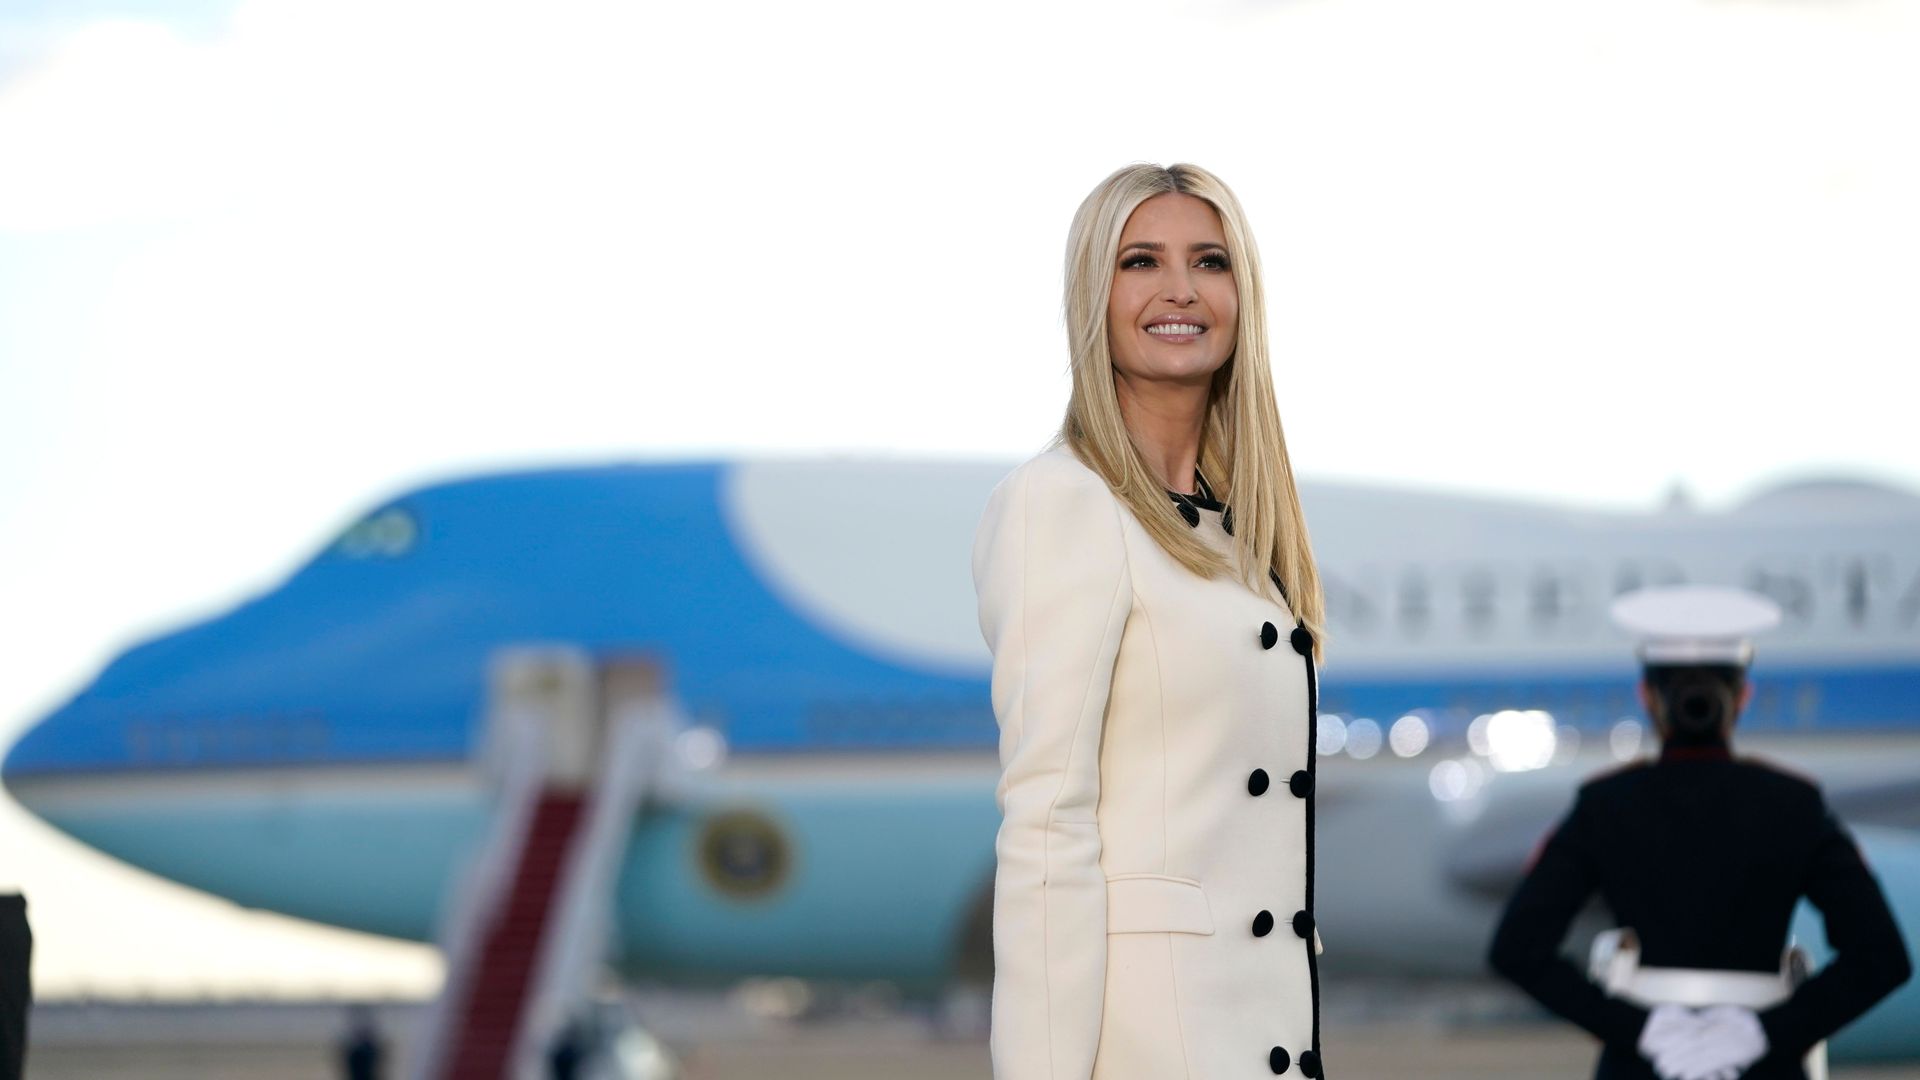 Ivanka Trump is seen standing in front of Air Force One on Inauguration Day 2021.